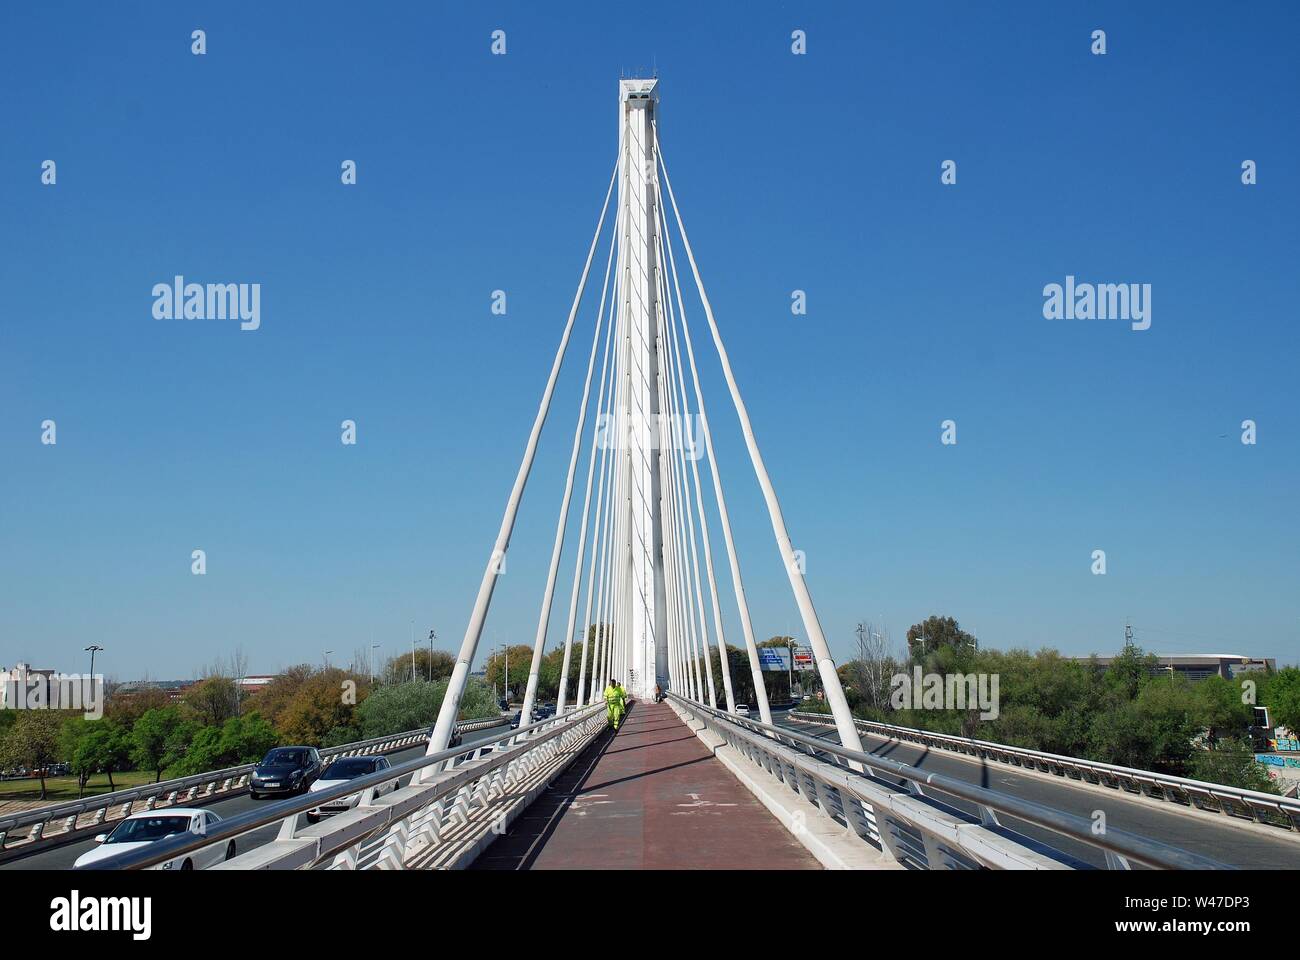 The Puente del Alamillo in Seville, Spain on April 3, 2019. Designed by Santiago Calatrava, it opened in 1992 for the Universal Exposition. Stock Photo